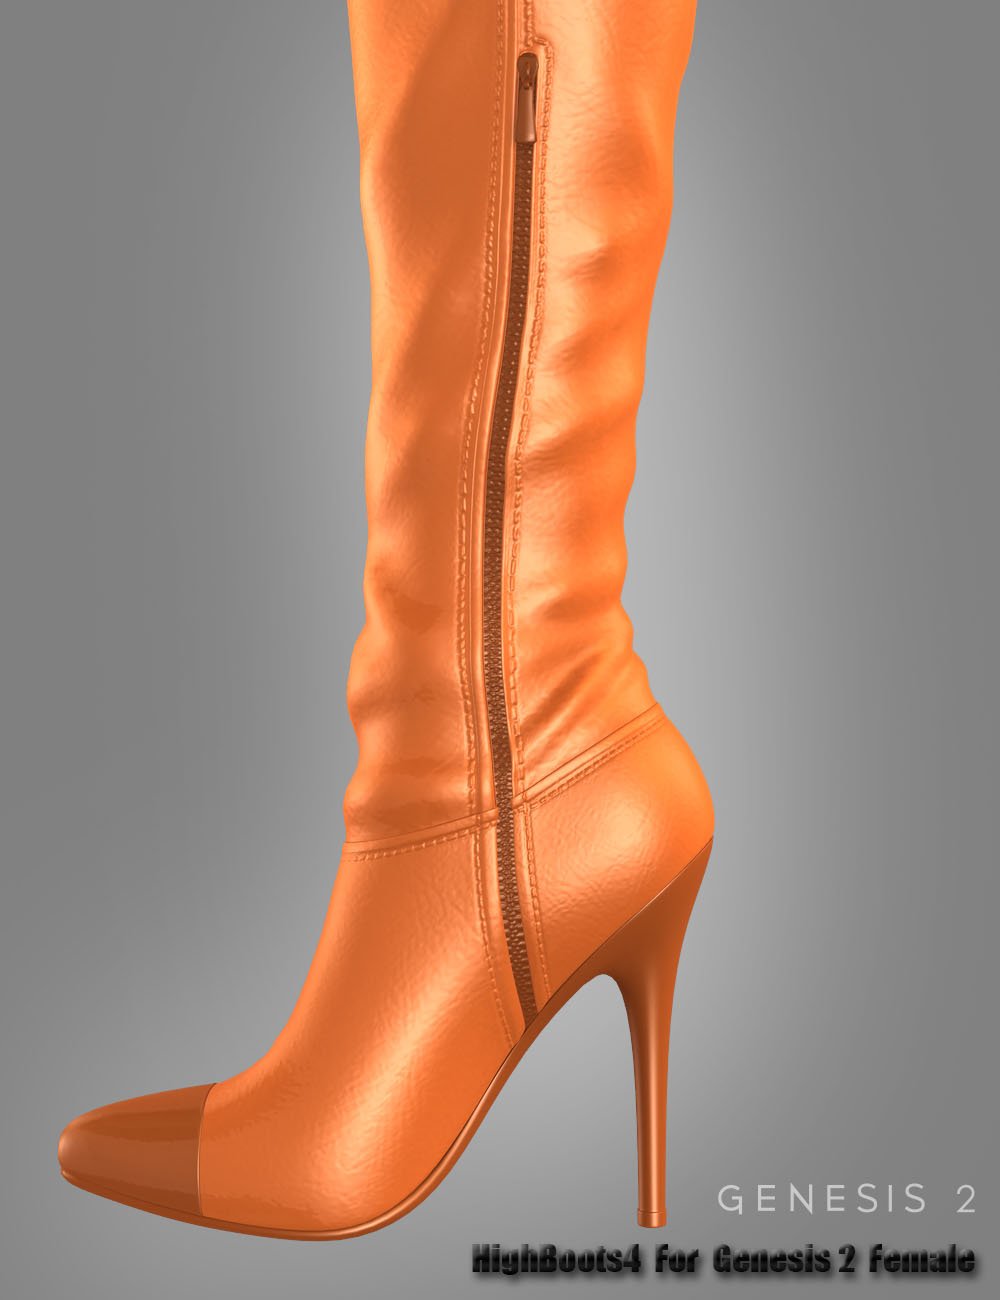 High Boots 4 For Genesis 2 Female(s) by: dx30, 3D Models by Daz 3D